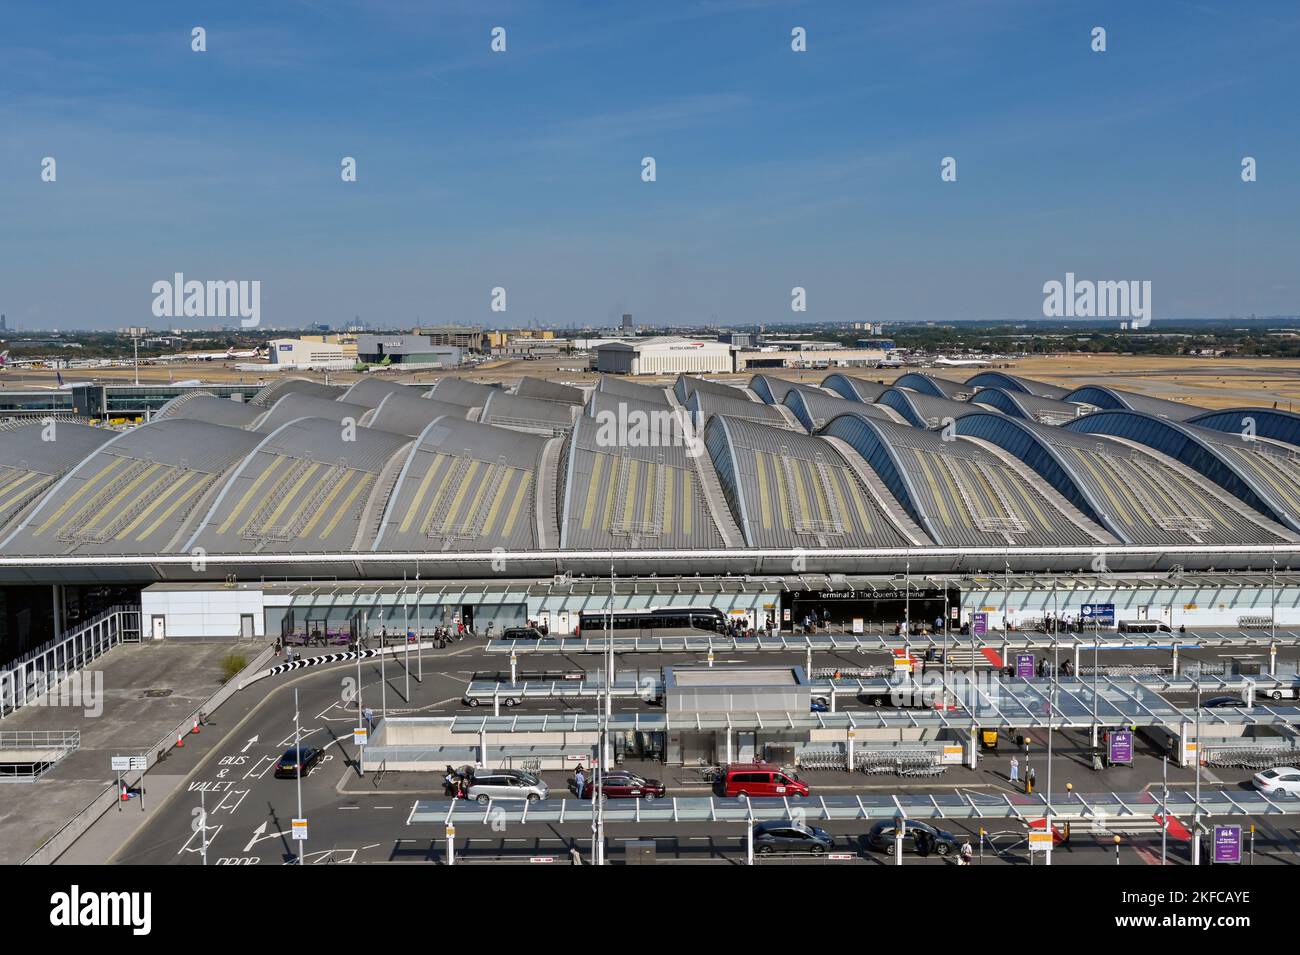 London, England - August 2022: Aerial view of the drop off zone and entrance to Terminal 2, The Queen's Terminal, at London Heathrow airport Stock Photo